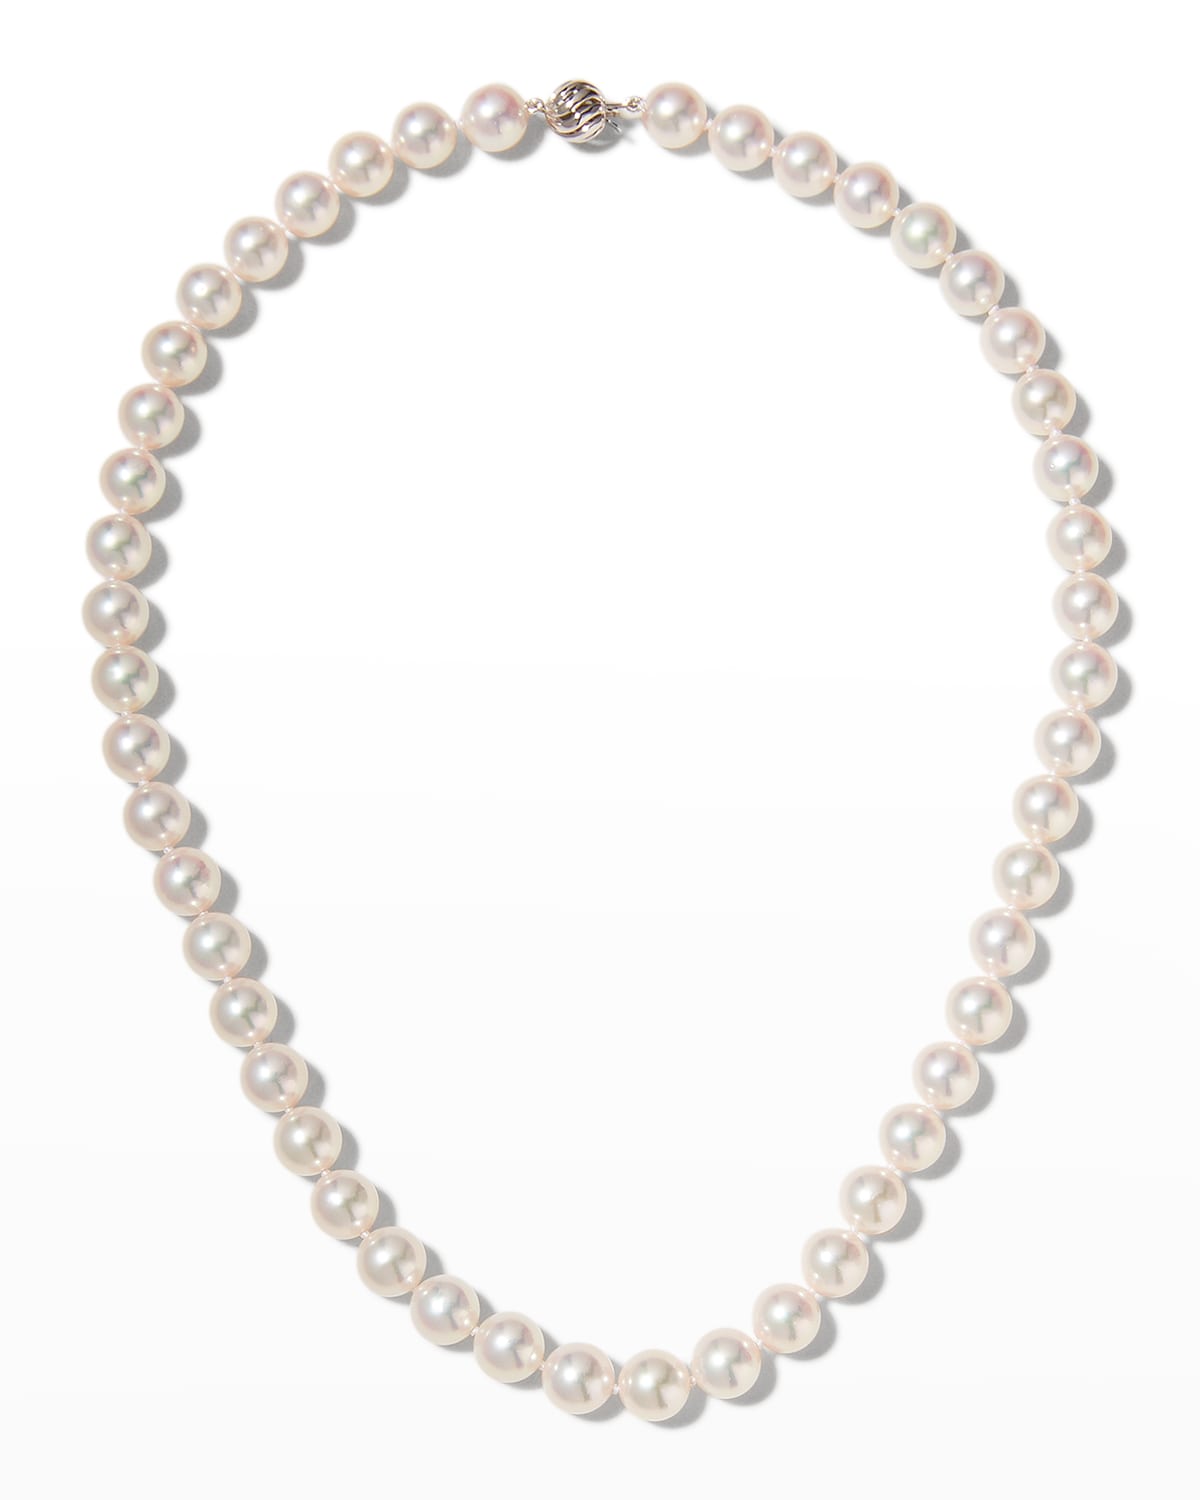 Belpearl 18k White Gold Classic Akoya Cultured Pearl Necklace, 8.5x9mm